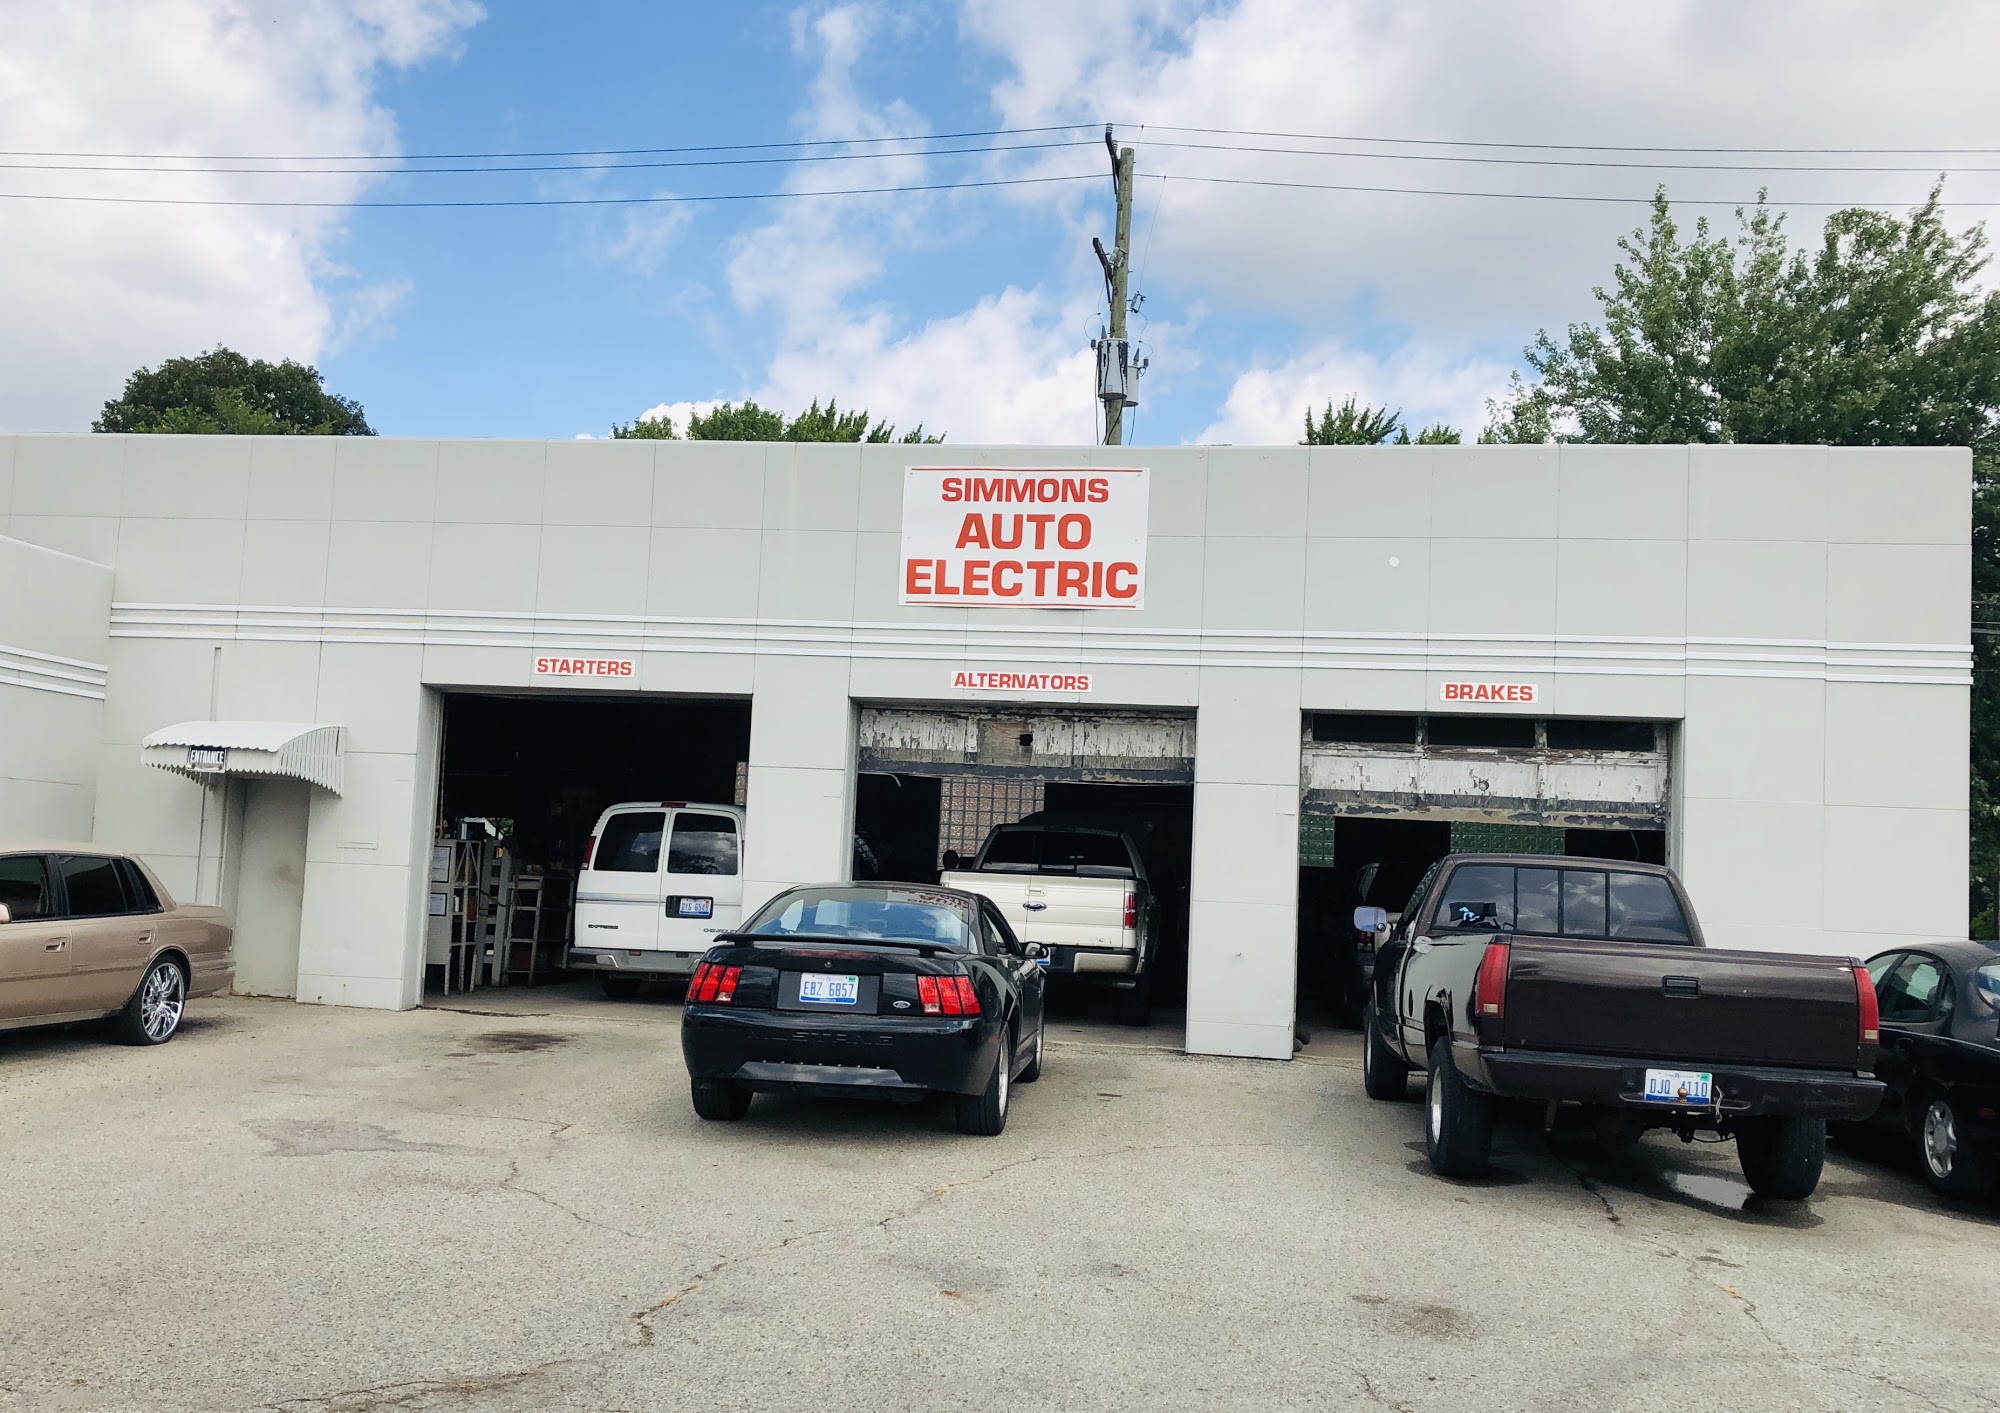 Simmons Auto Electric